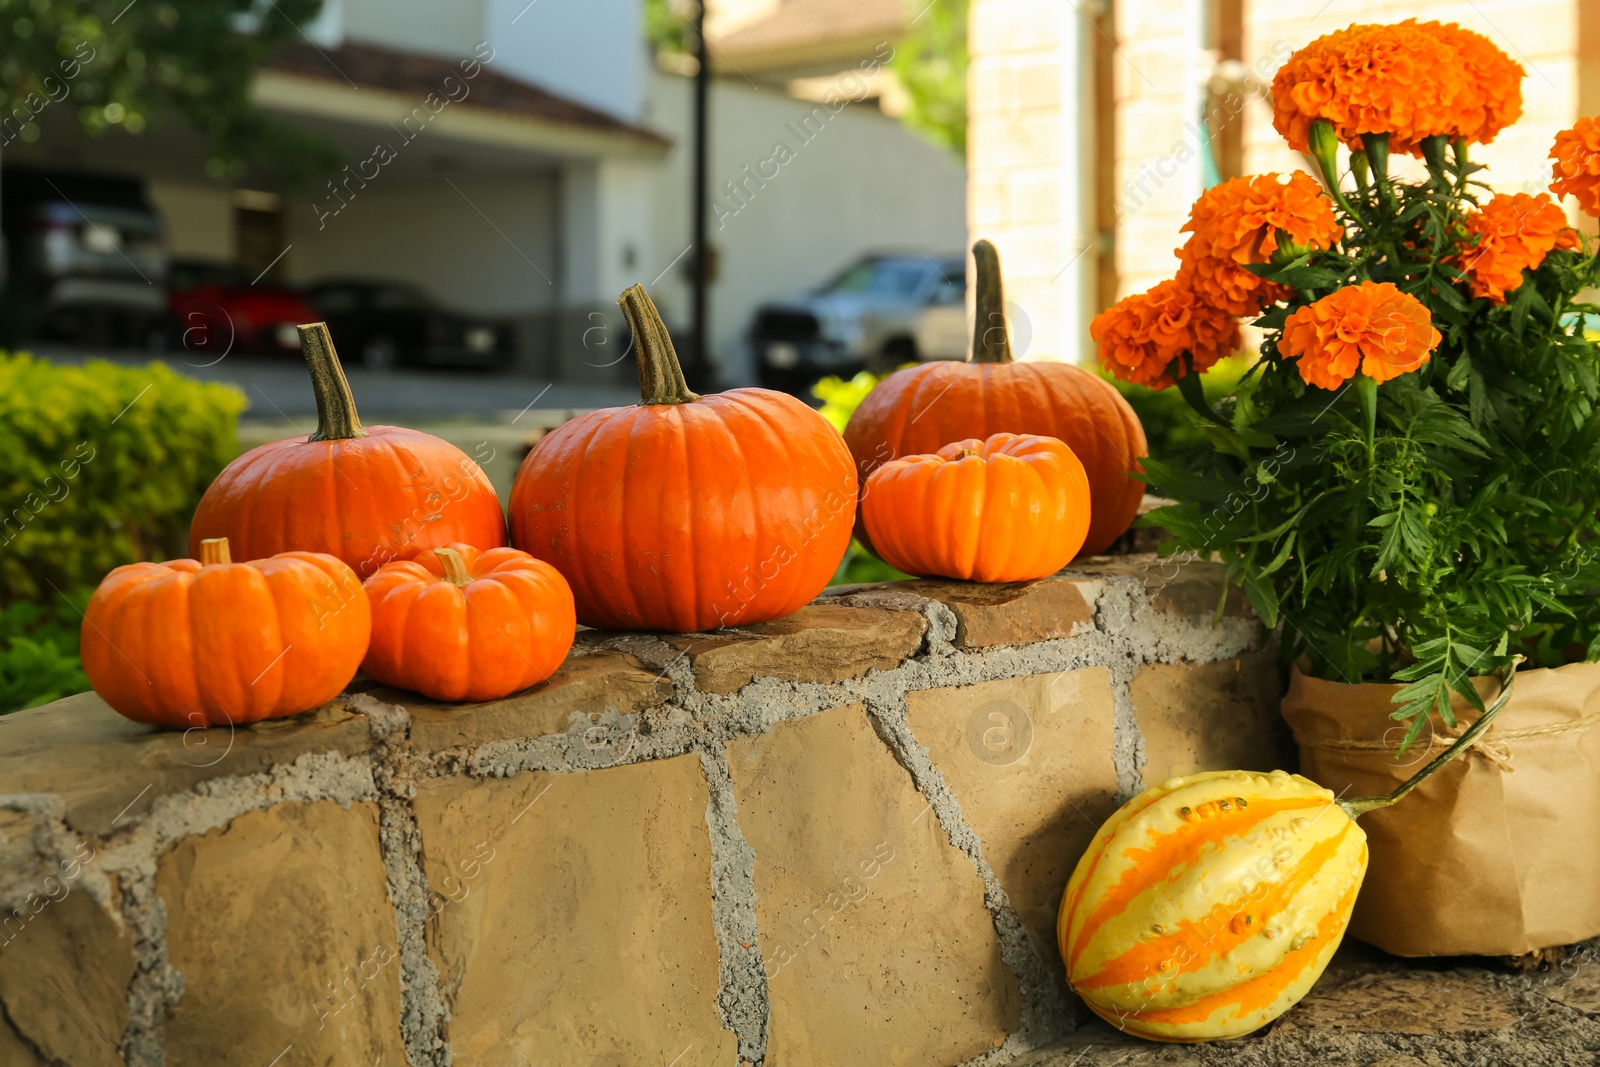 Photo of Many whole ripe pumpkins and potted flowers on stone curb in garden